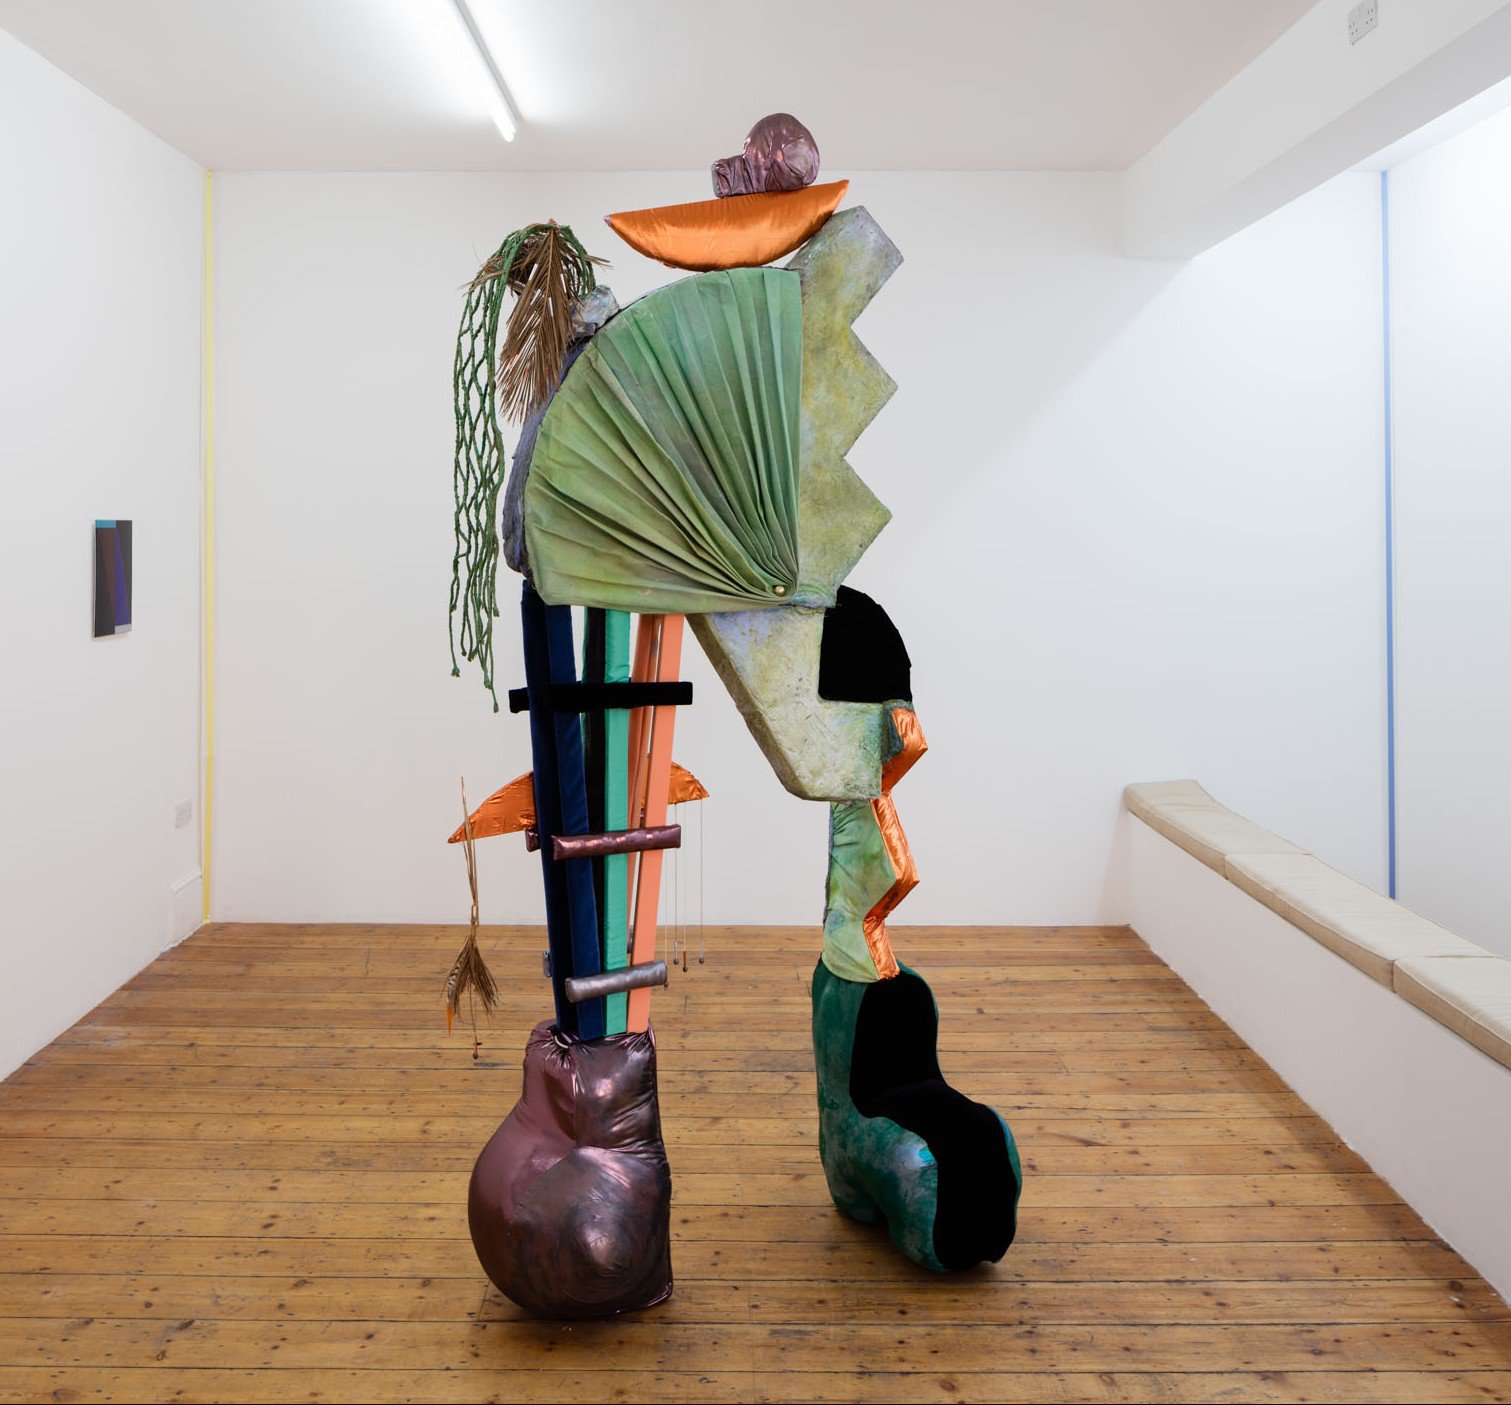 Tamara Henderson, The Scarecrow’s Holiday, textile, wood, glass, sand, pigment, rope, 260 x 112 x 56 cm (102 3/8 x 44 1/8 x 22 in), 2015